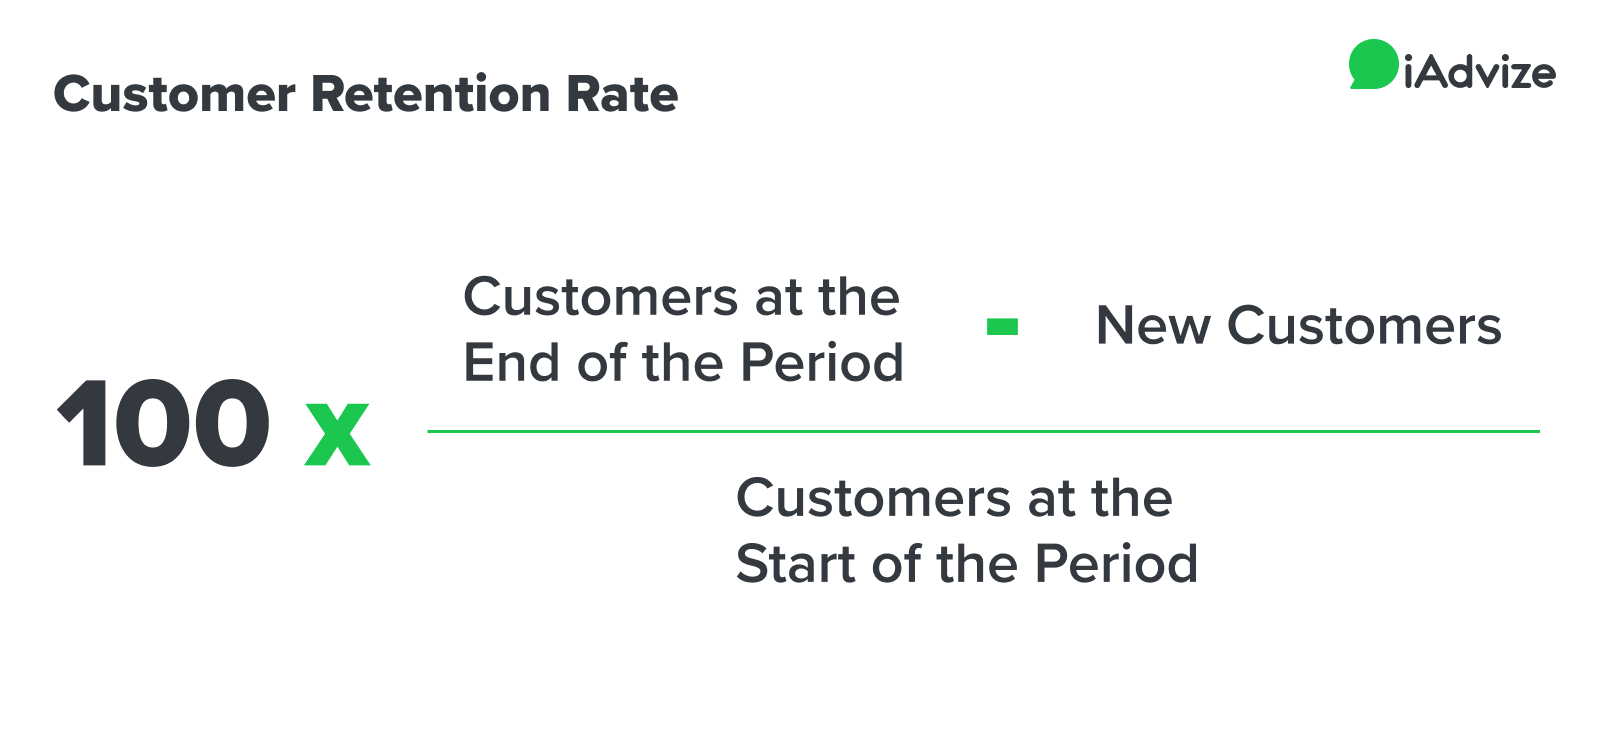 How to Calculate Customer Retention Rate